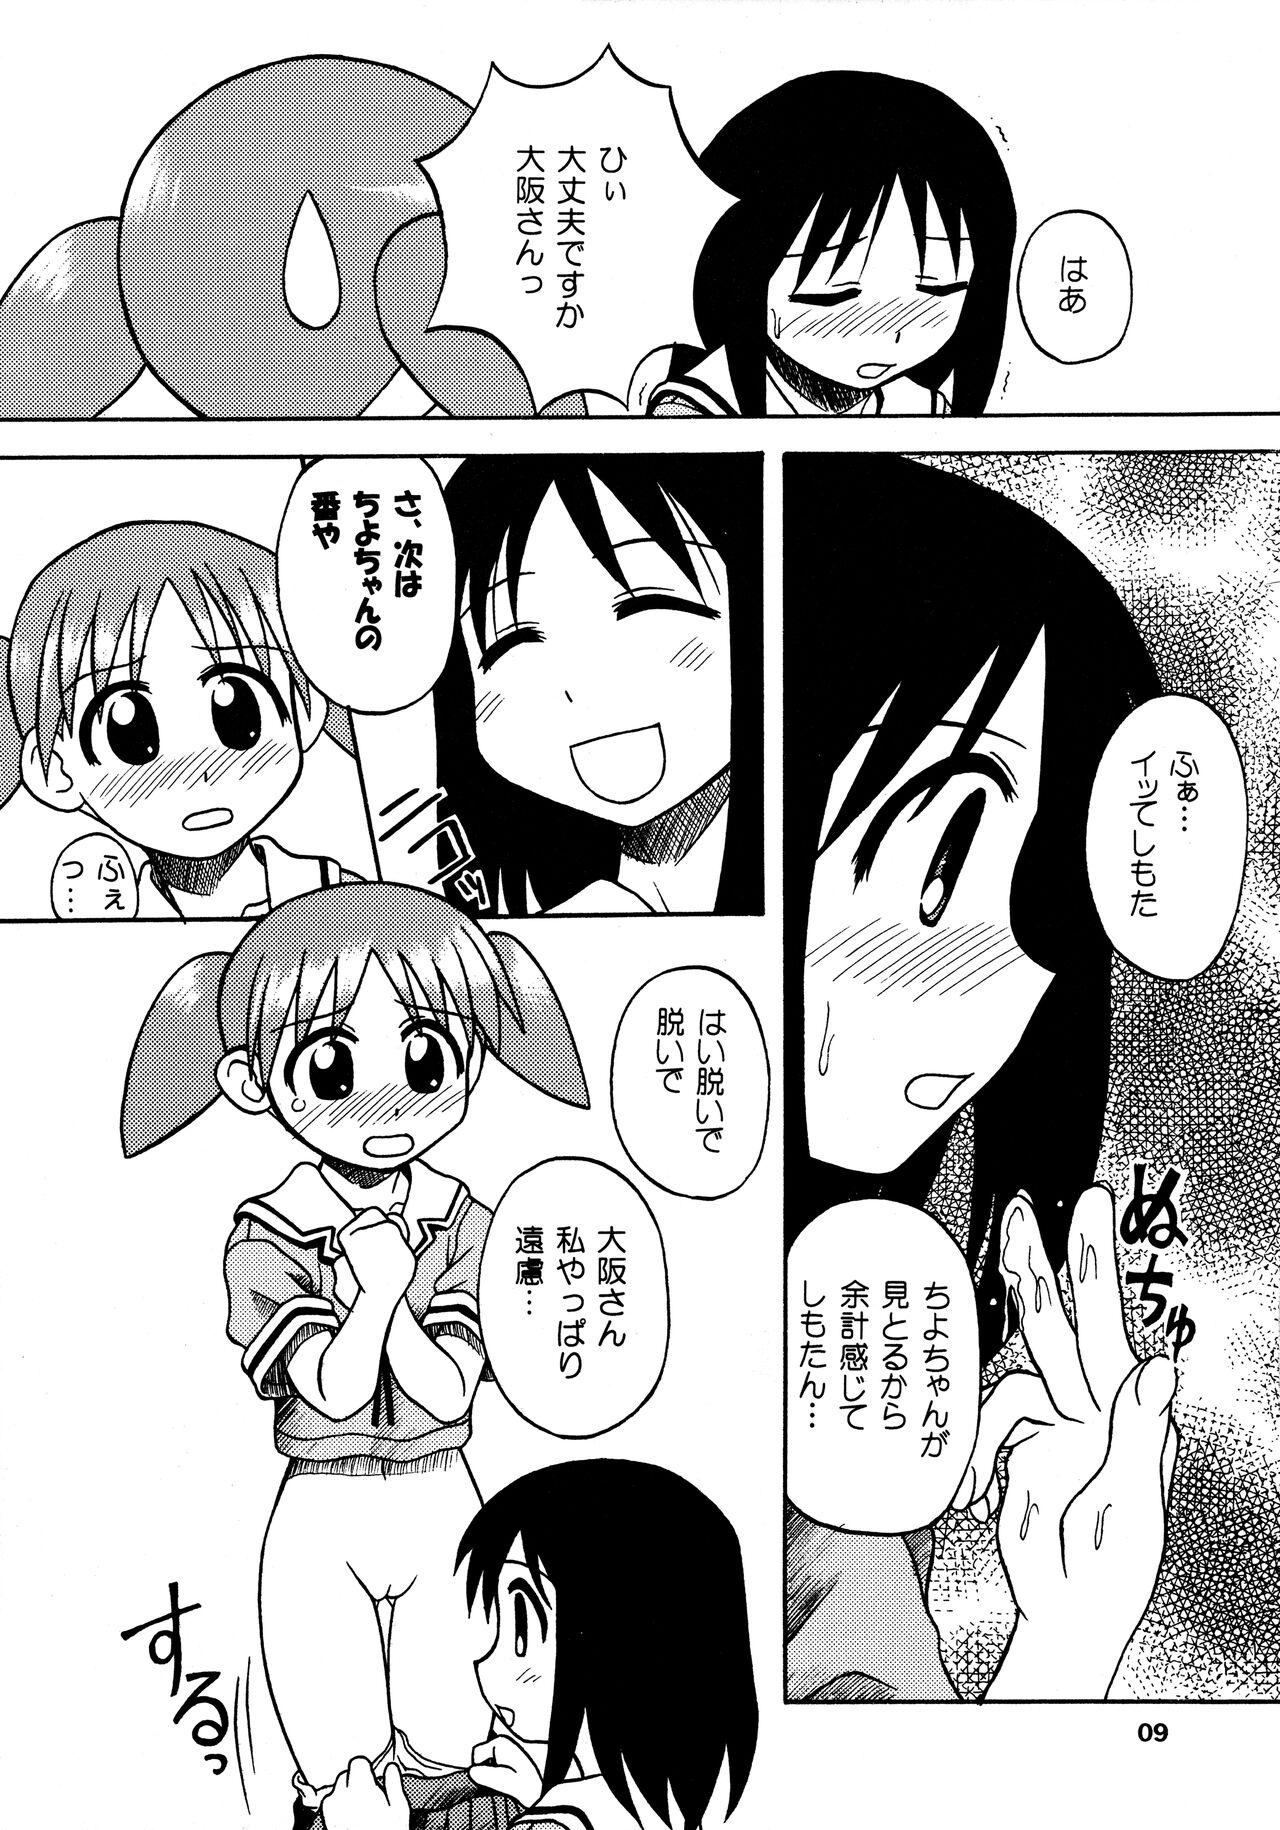 Soapy ANOTHER LIFE - Azumanga daioh Sexo - Page 9